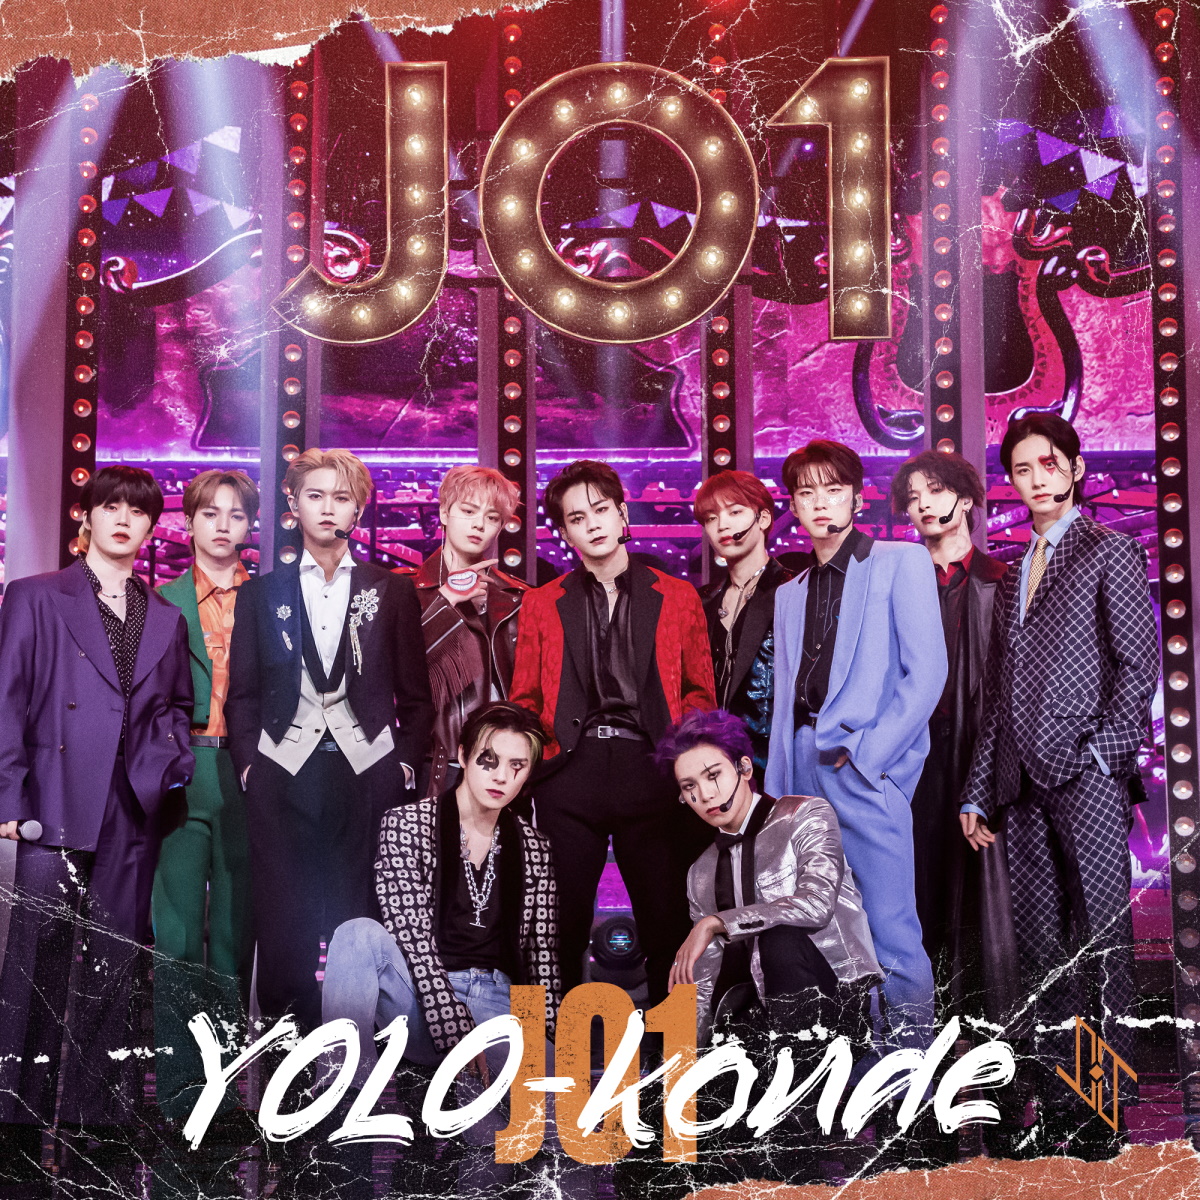 Cover image of『JO1YOLO-konde』from the Album『』